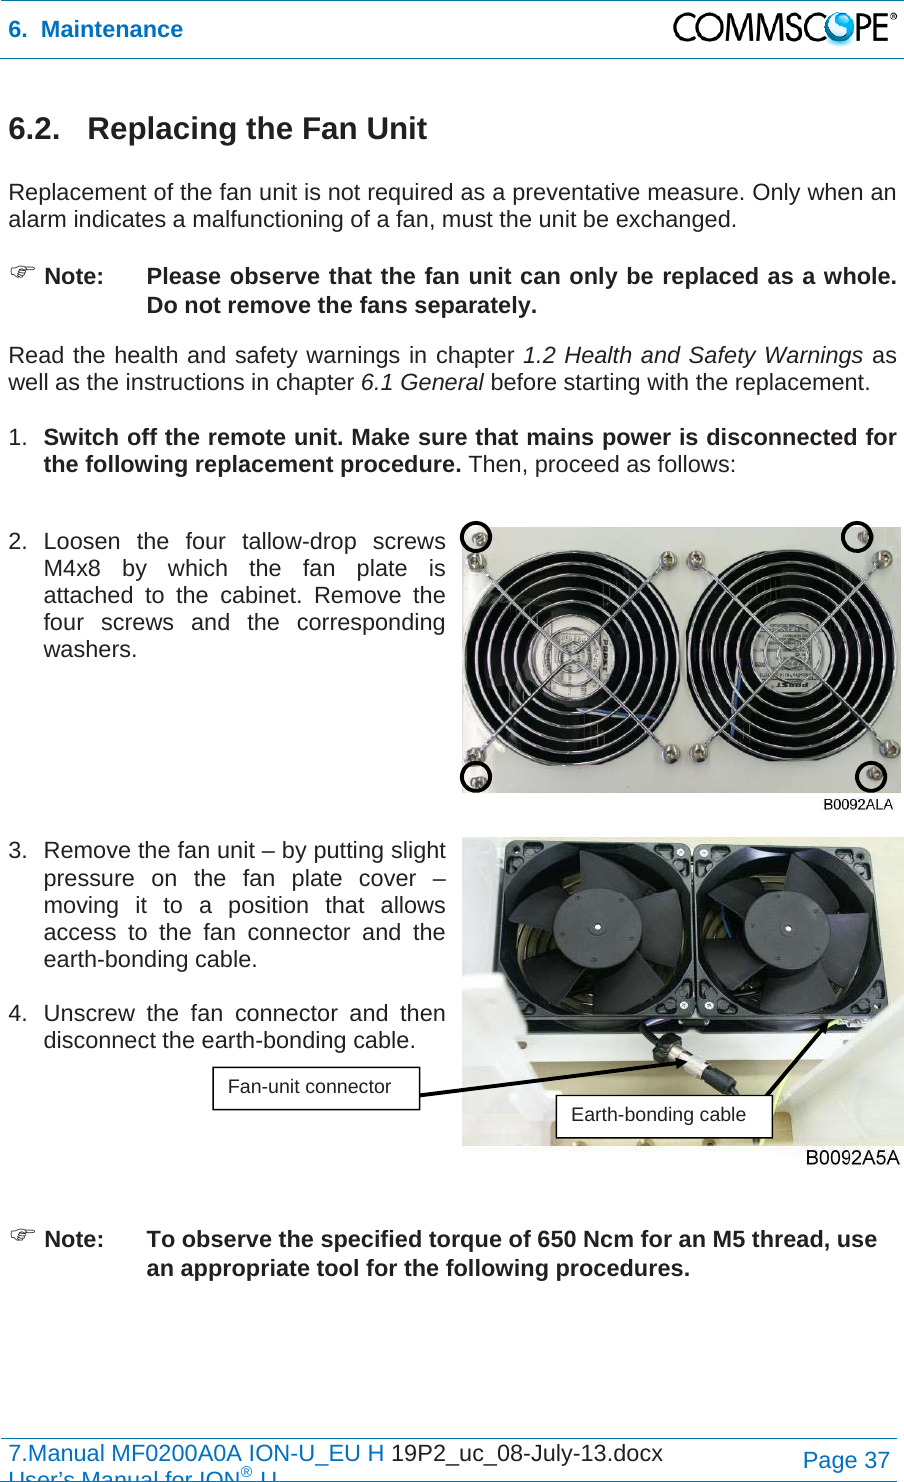 6.  Maintenance  7.Manual MF0200A0A ION-U_EU H 19P2_uc_08-July-13.docx   User’s Manual for ION®UPage 37 6.2.   Replacing the Fan Unit  Replacement of the fan unit is not required as a preventative measure. Only when an alarm indicates a malfunctioning of a fan, must the unit be exchanged.  Note:  Please observe that the fan unit can only be replaced as a whole. Do not remove the fans separately. Read the health and safety warnings in chapter 1.2 Health and Safety Warnings as well as the instructions in chapter 6.1 General before starting with the replacement.   1.  Switch off the remote unit. Make sure that mains power is disconnected for the following replacement procedure. Then, proceed as follows:  2. Loosen the four tallow-drop screws M4x8 by which the fan plate is attached to the cabinet. Remove the four screws and the corresponding washers.    3.  Remove the fan unit – by putting slight pressure on the fan plate cover – moving it to a position that allows access to the fan connector and the earth-bonding cable.   4.  Unscrew the fan connector and then disconnect the earth-bonding cable.     Note:  To observe the specified torque of 650 Ncm for an M5 thread, use an appropriate tool for the following procedures. Fan-unit connector Earth-bonding cable 